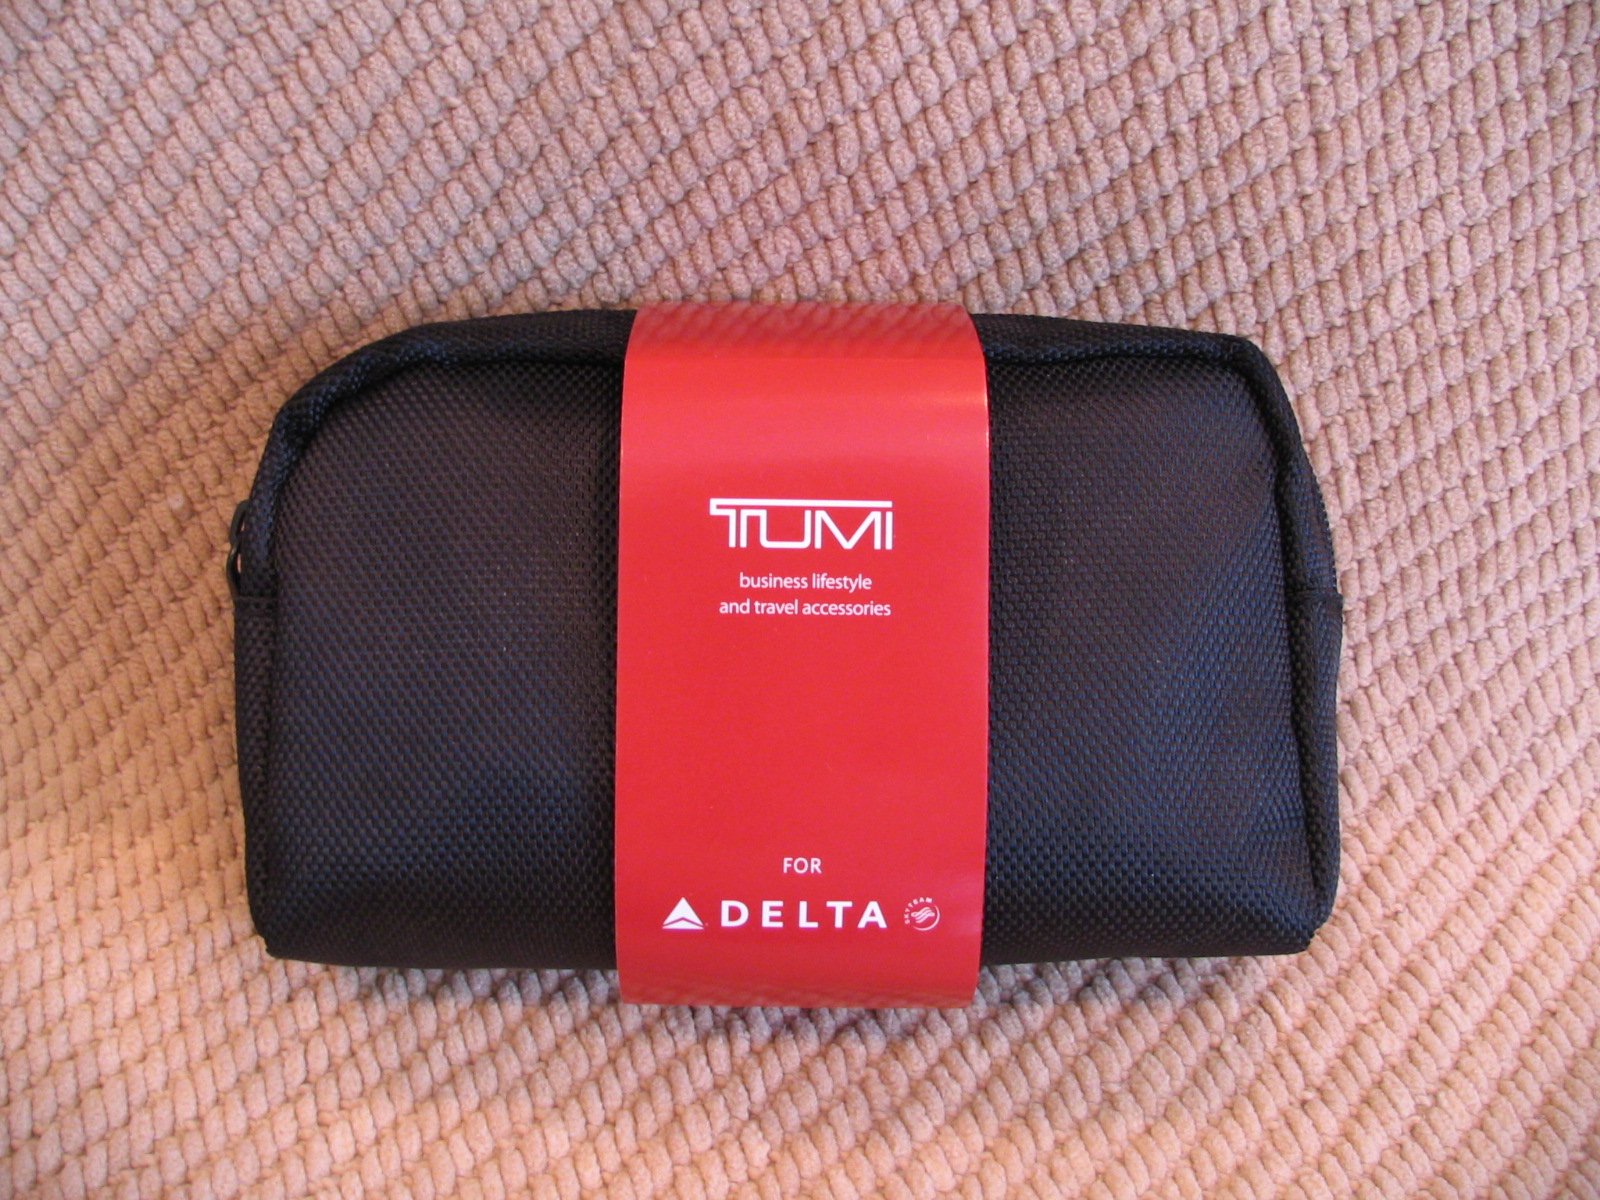 Amenity Kit Review: Delta Air Lines 